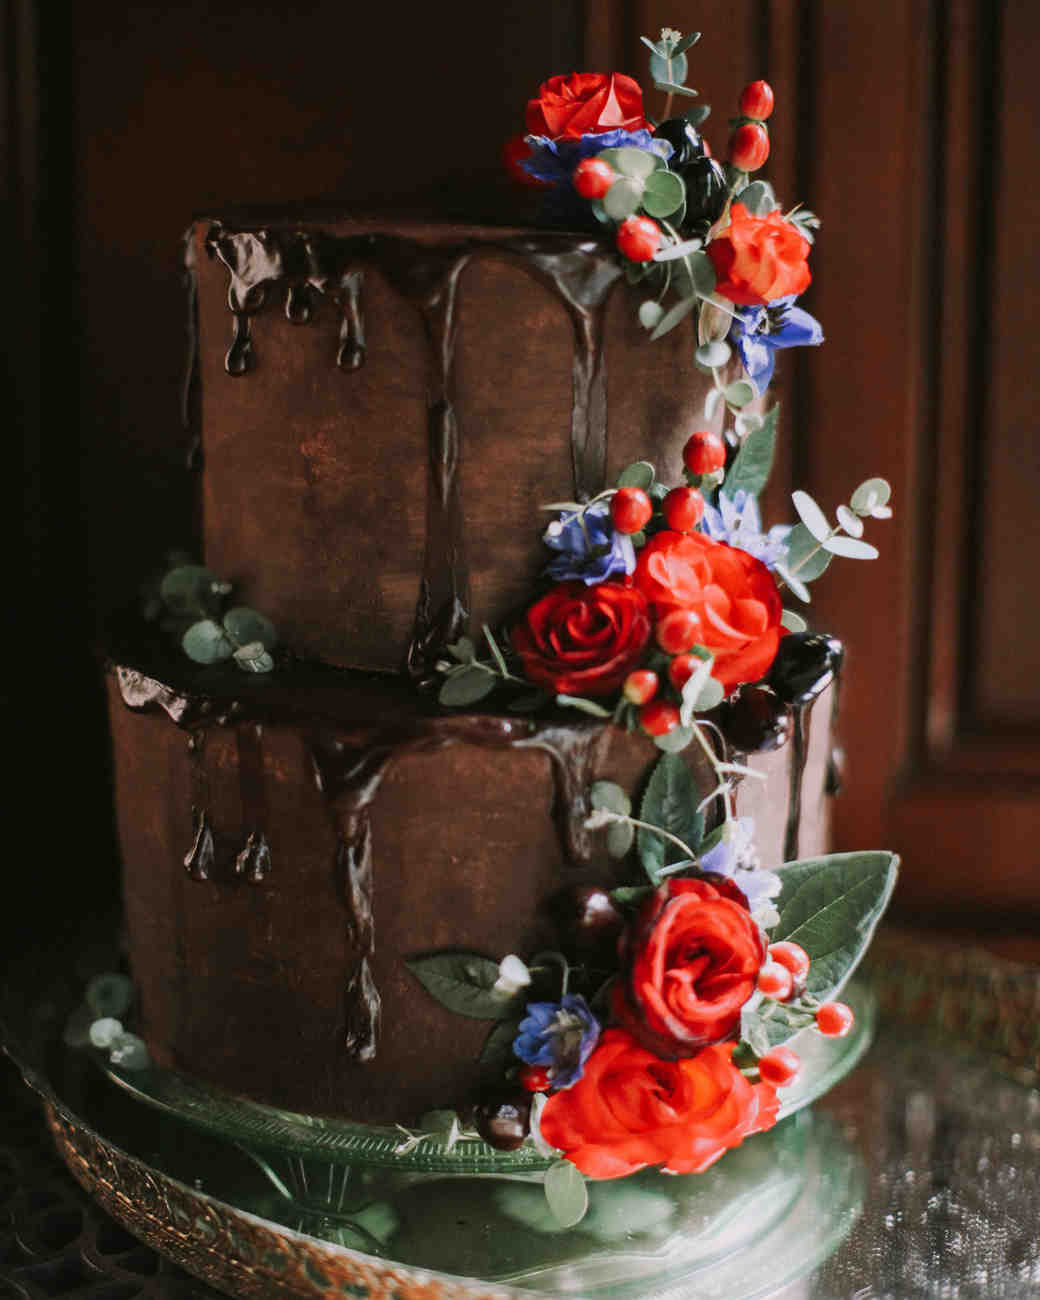 Chocolate Frosting Wedding Cakes
 26 Chocolate Wedding Cake Ideas That Will Blow Your Guests